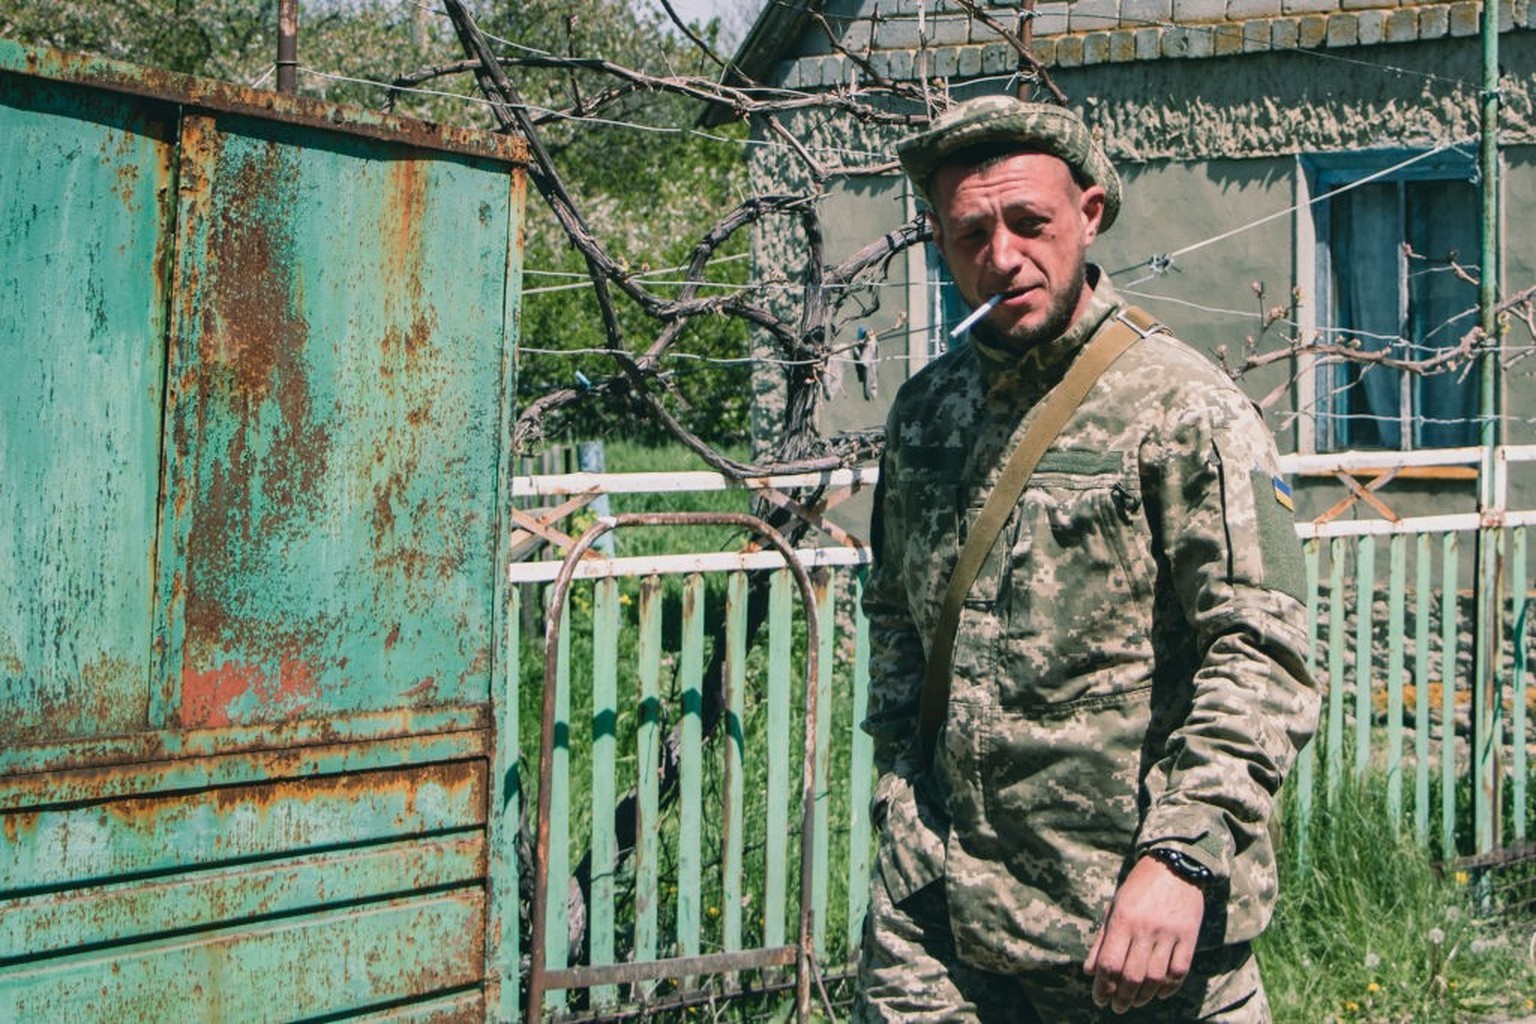 NOVOIVANOVK, DNEPROPETROVSK, UKRAINE - 2022/05/06: A Ukrainian soldier is smoking a cigarette. Ukrainian soldiers are at the frontline in the village of Novoivanovk, Dnepropetrovsk region. Russian tro ...